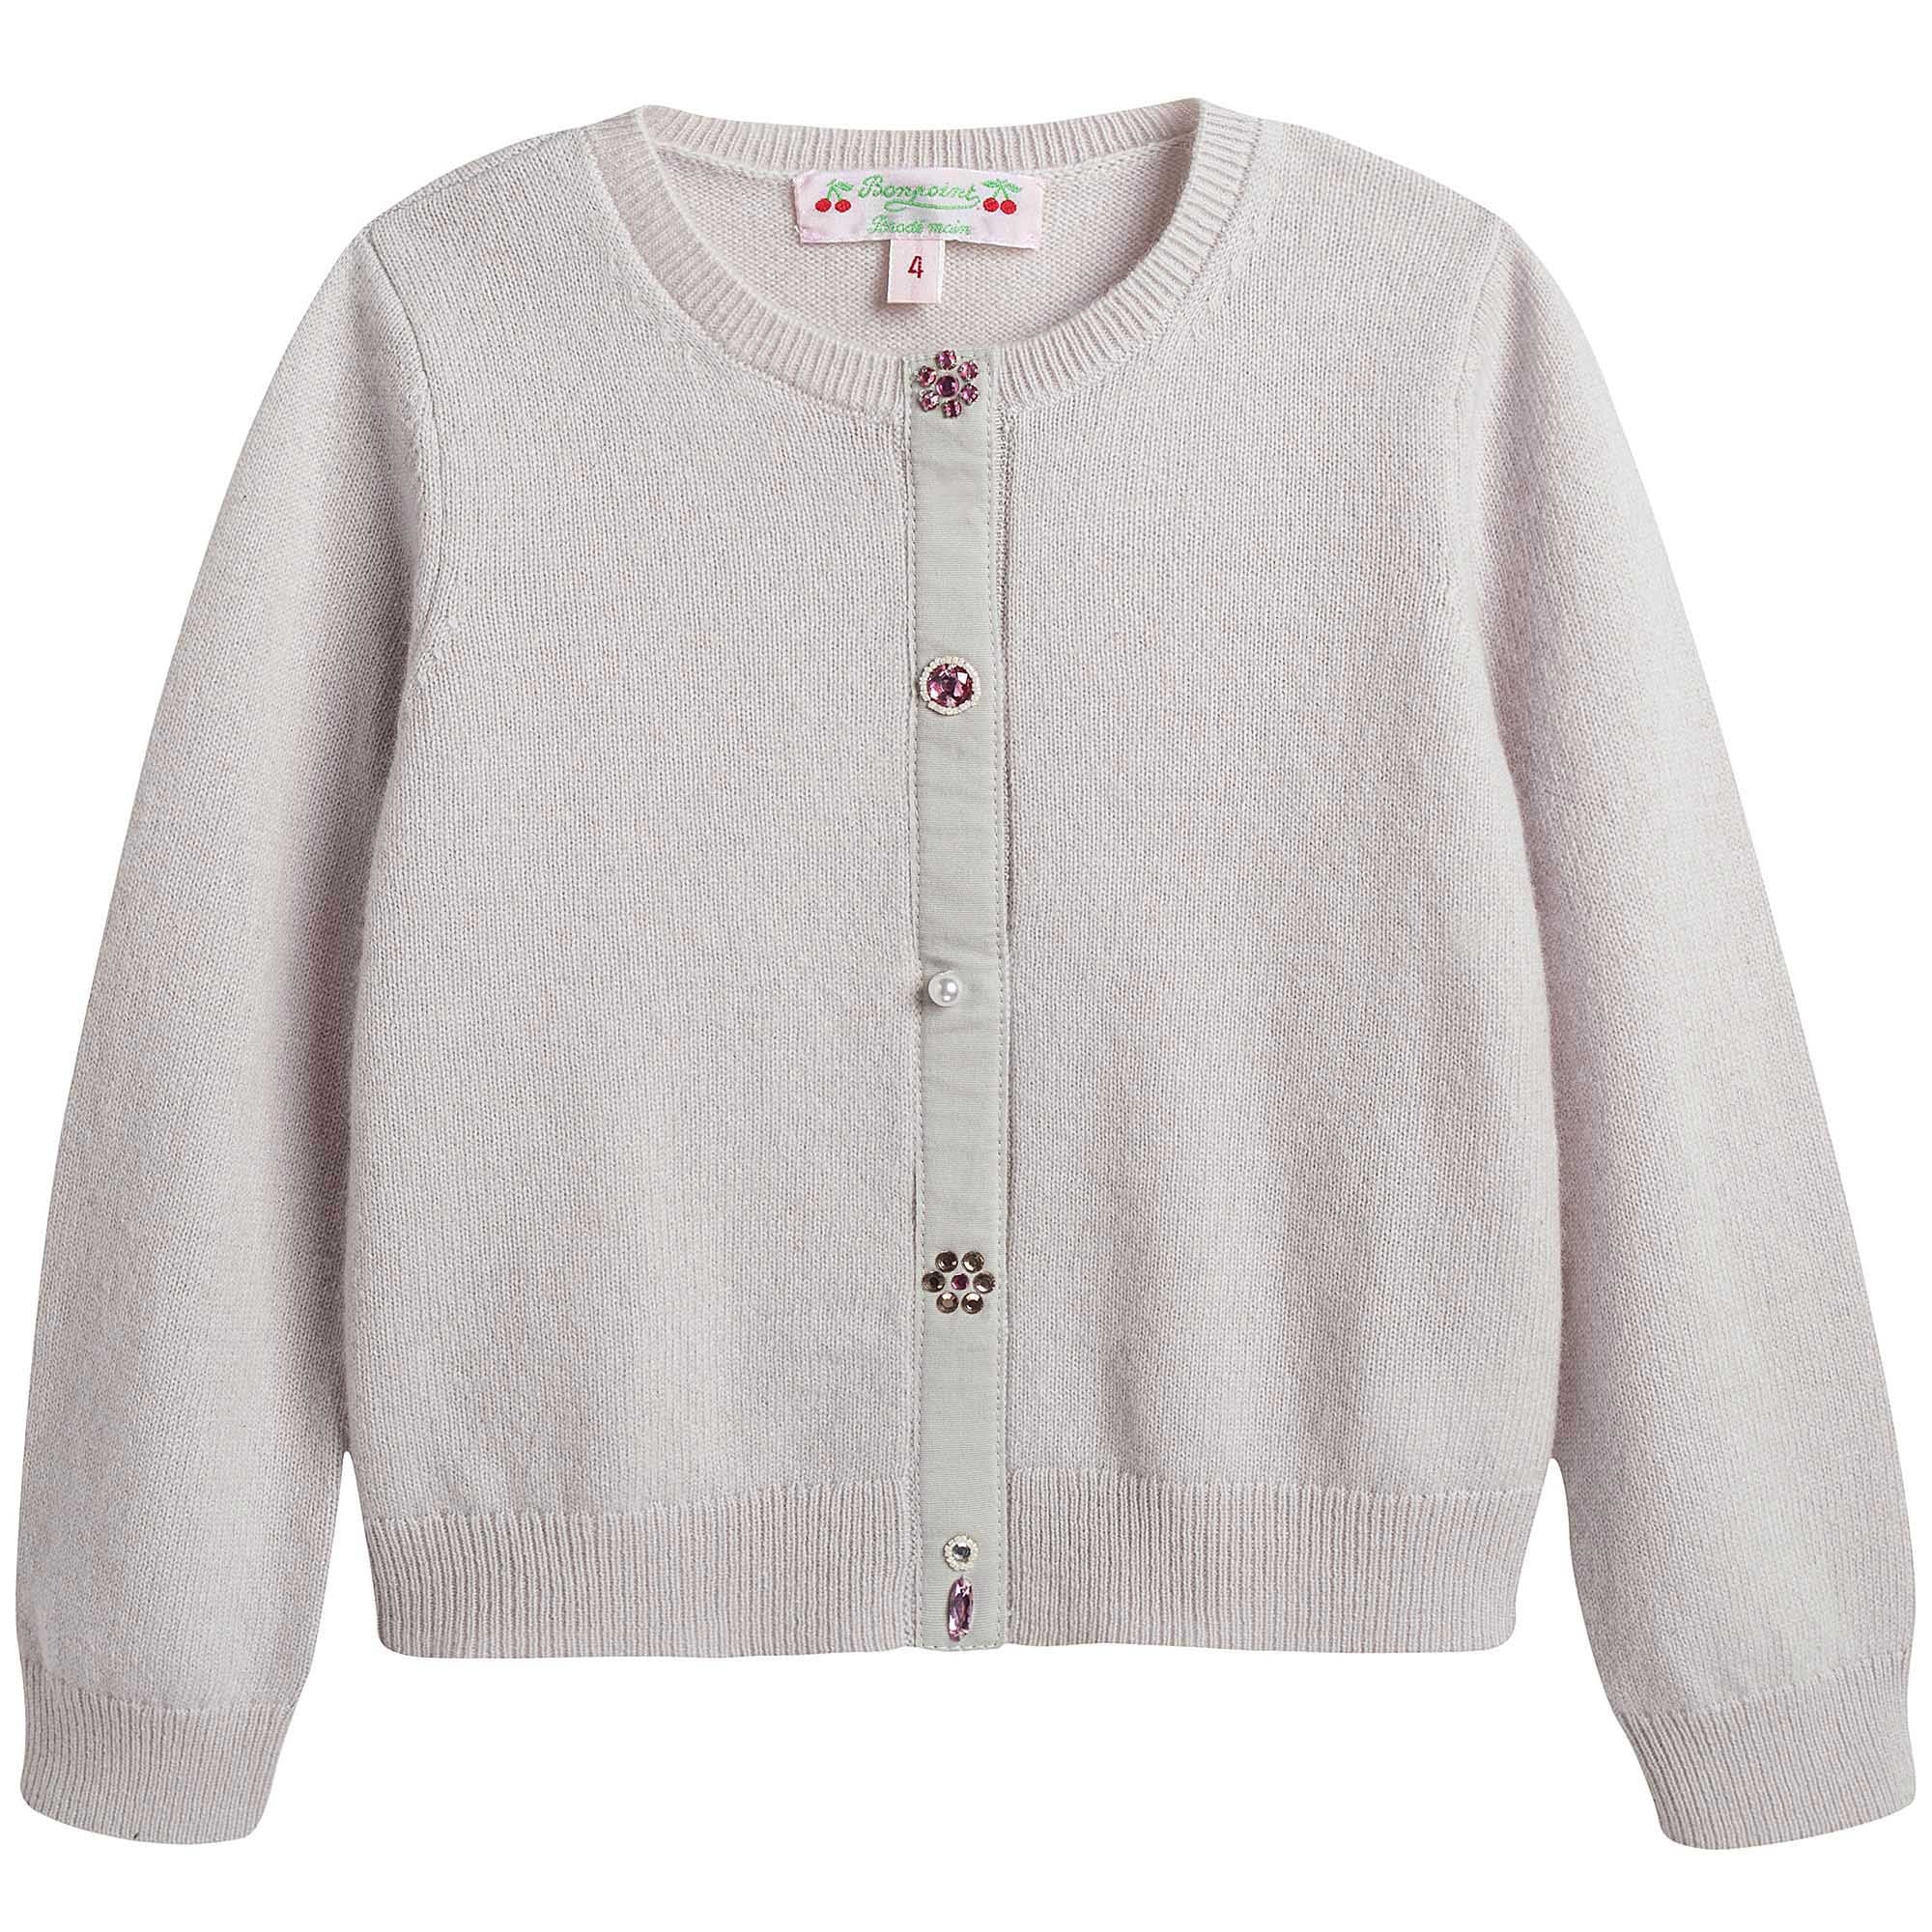 Girls Light Grey With Flowers Buttons Cashmere Sweater - CÉMAROSE | Children's Fashion Store - 1